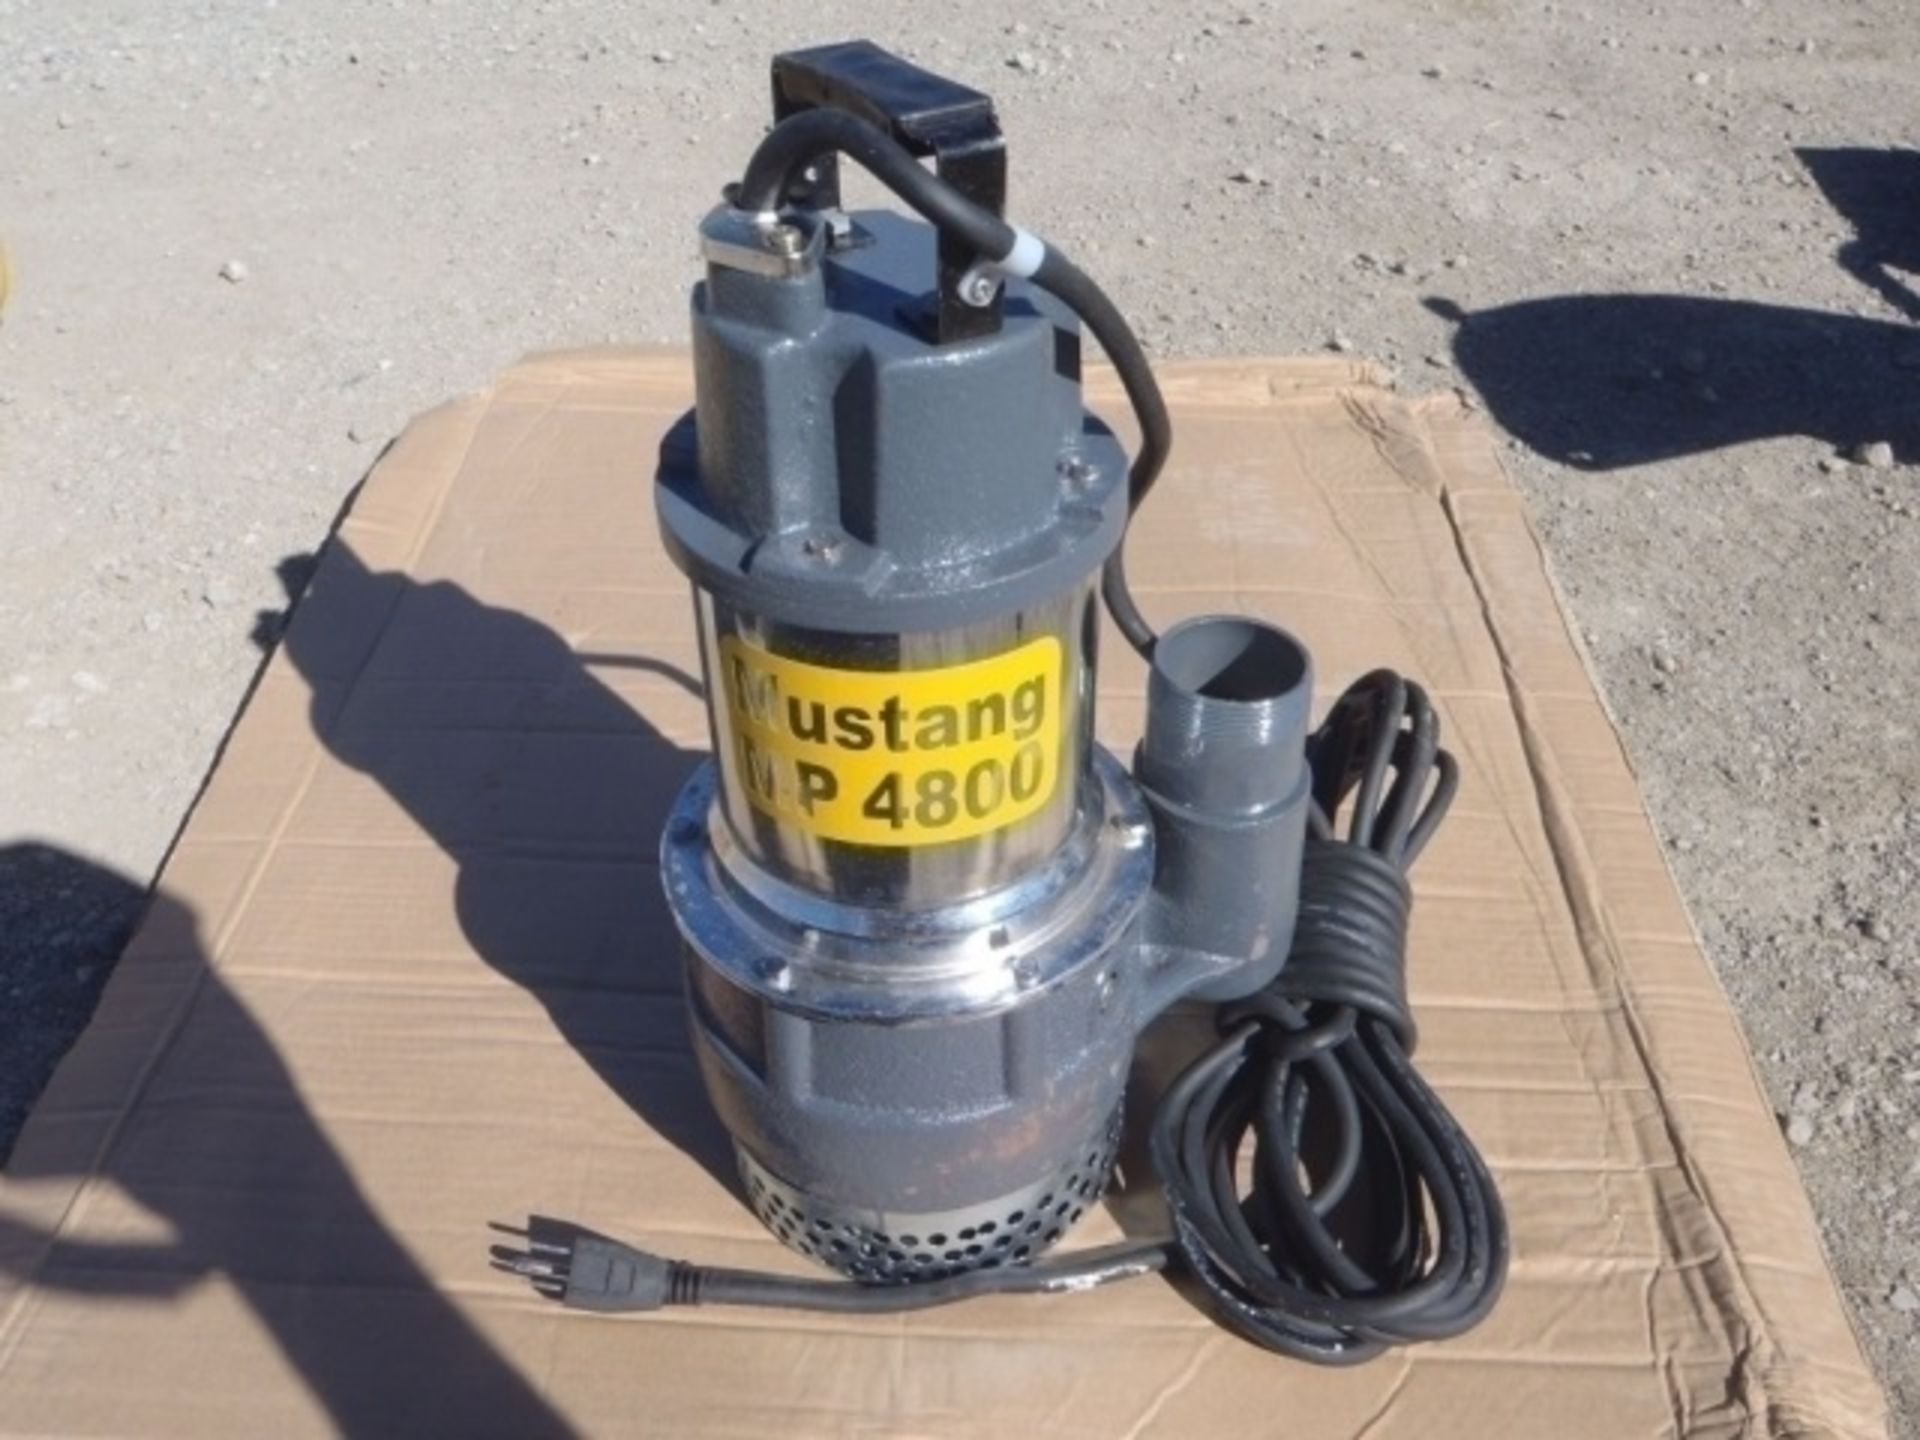 Unused Mustang MP4800 2" Submersible Pump, Electric - Image 3 of 4